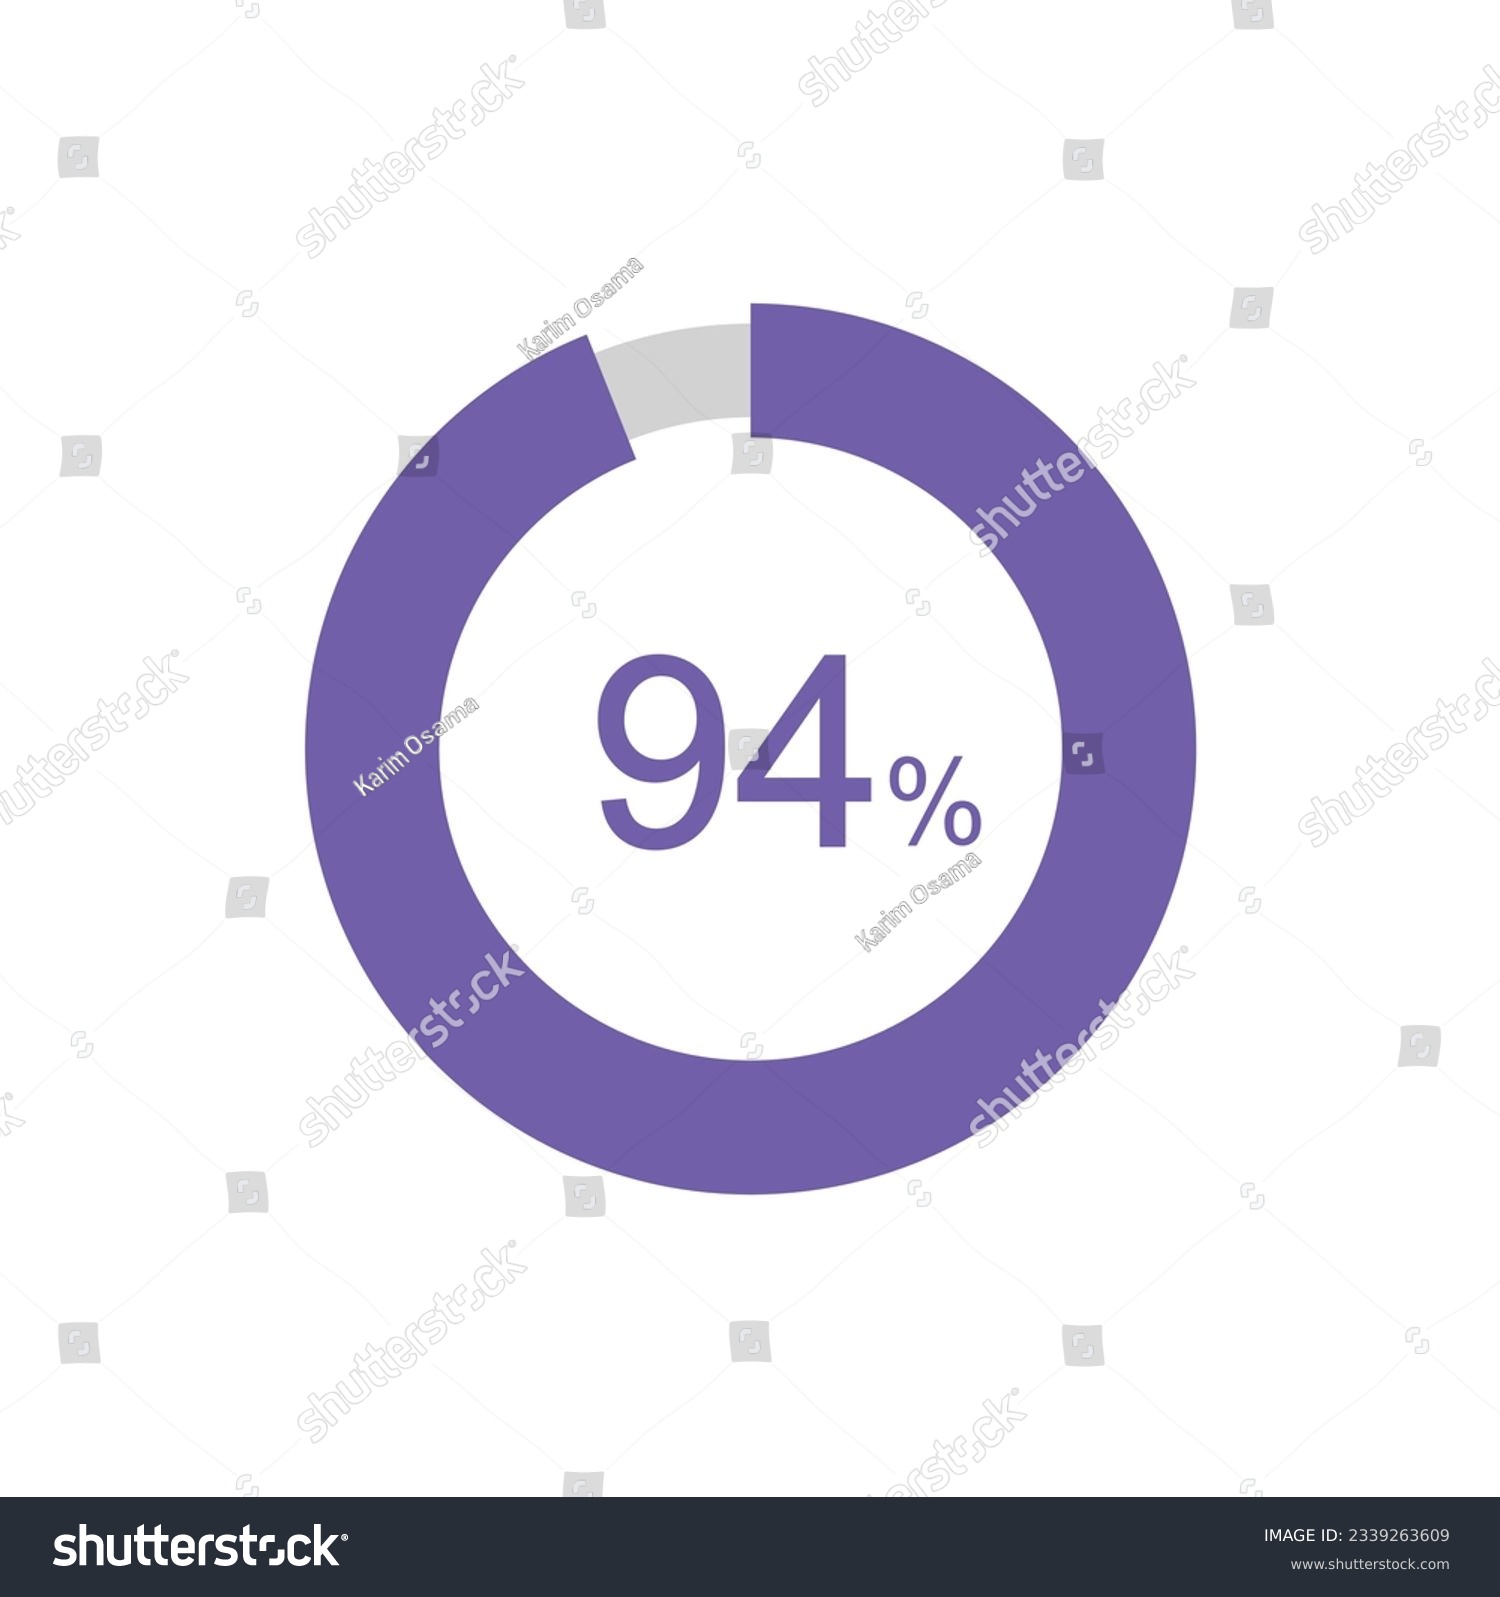 SVG of 94% circle percentage diagrams, 94 Percentage ready to use for web design, infographic or business. svg